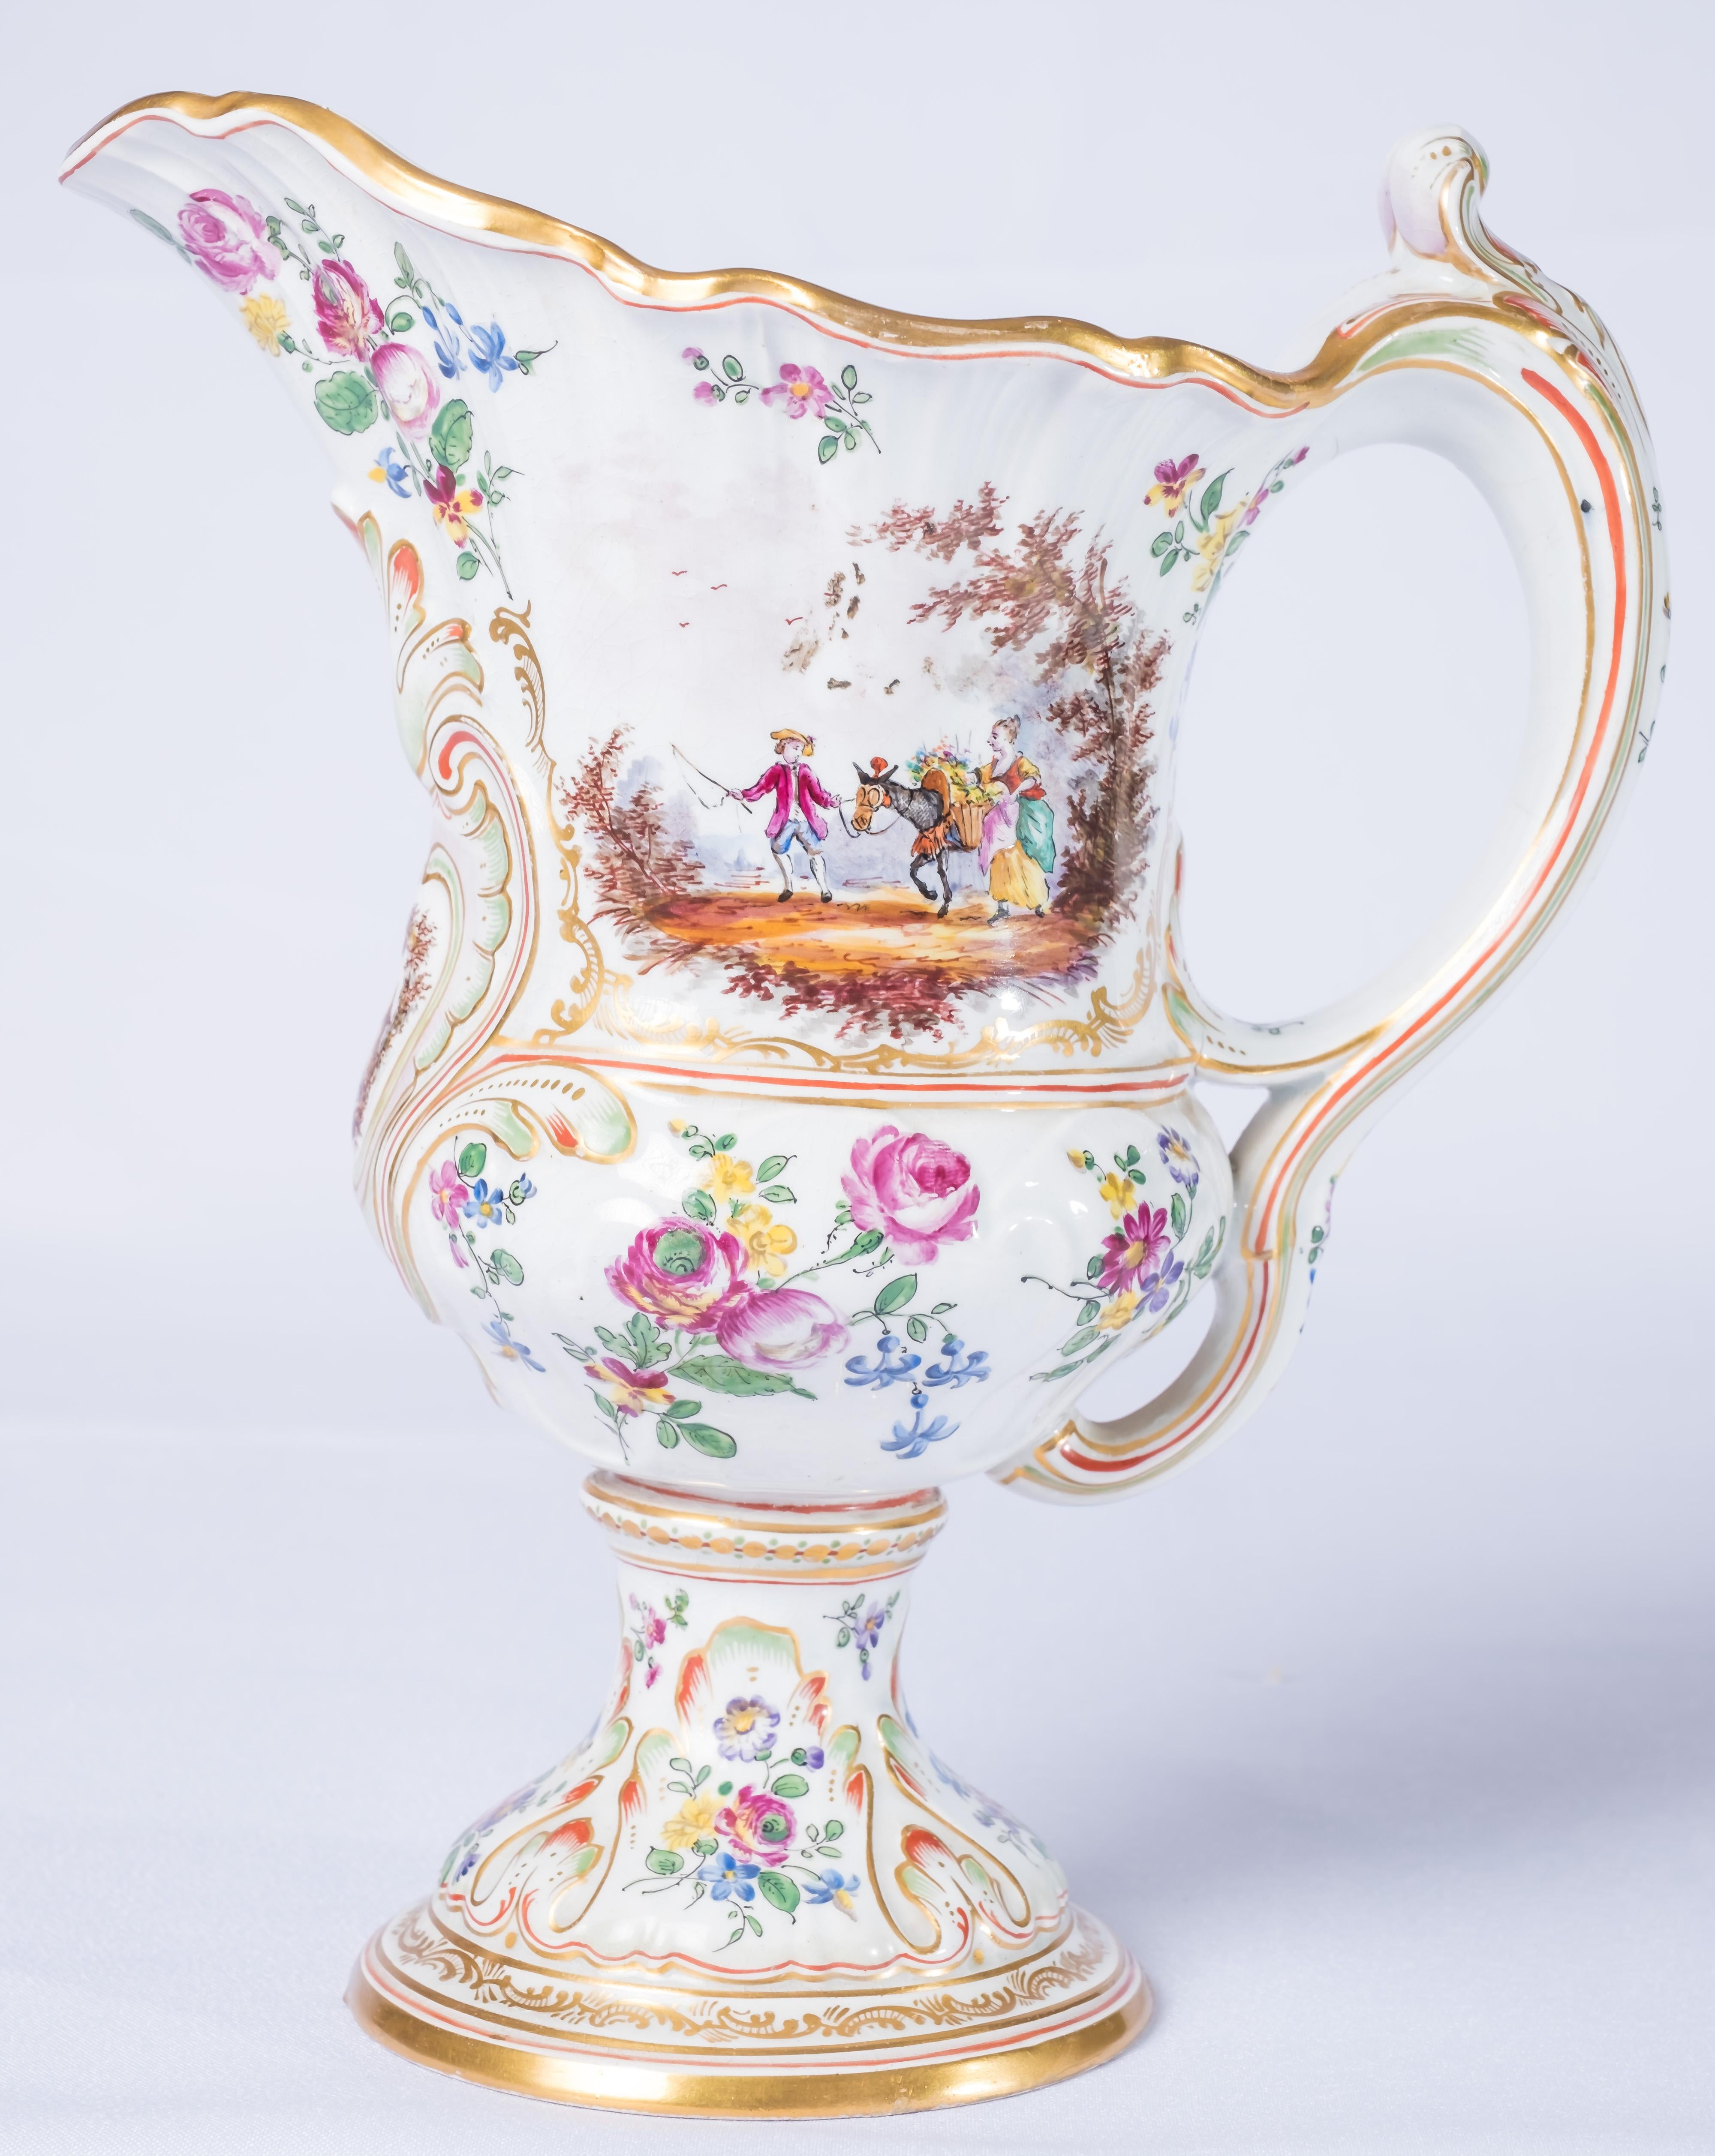 Water jug and basin 1767 Lille, North of France,
1767 Lille manufactory faience Washstand set hand painted with charming French Country side scene,
Decorated with a beautiful floral drawings and gold borders. Hand painted marked Lille 1767 with a